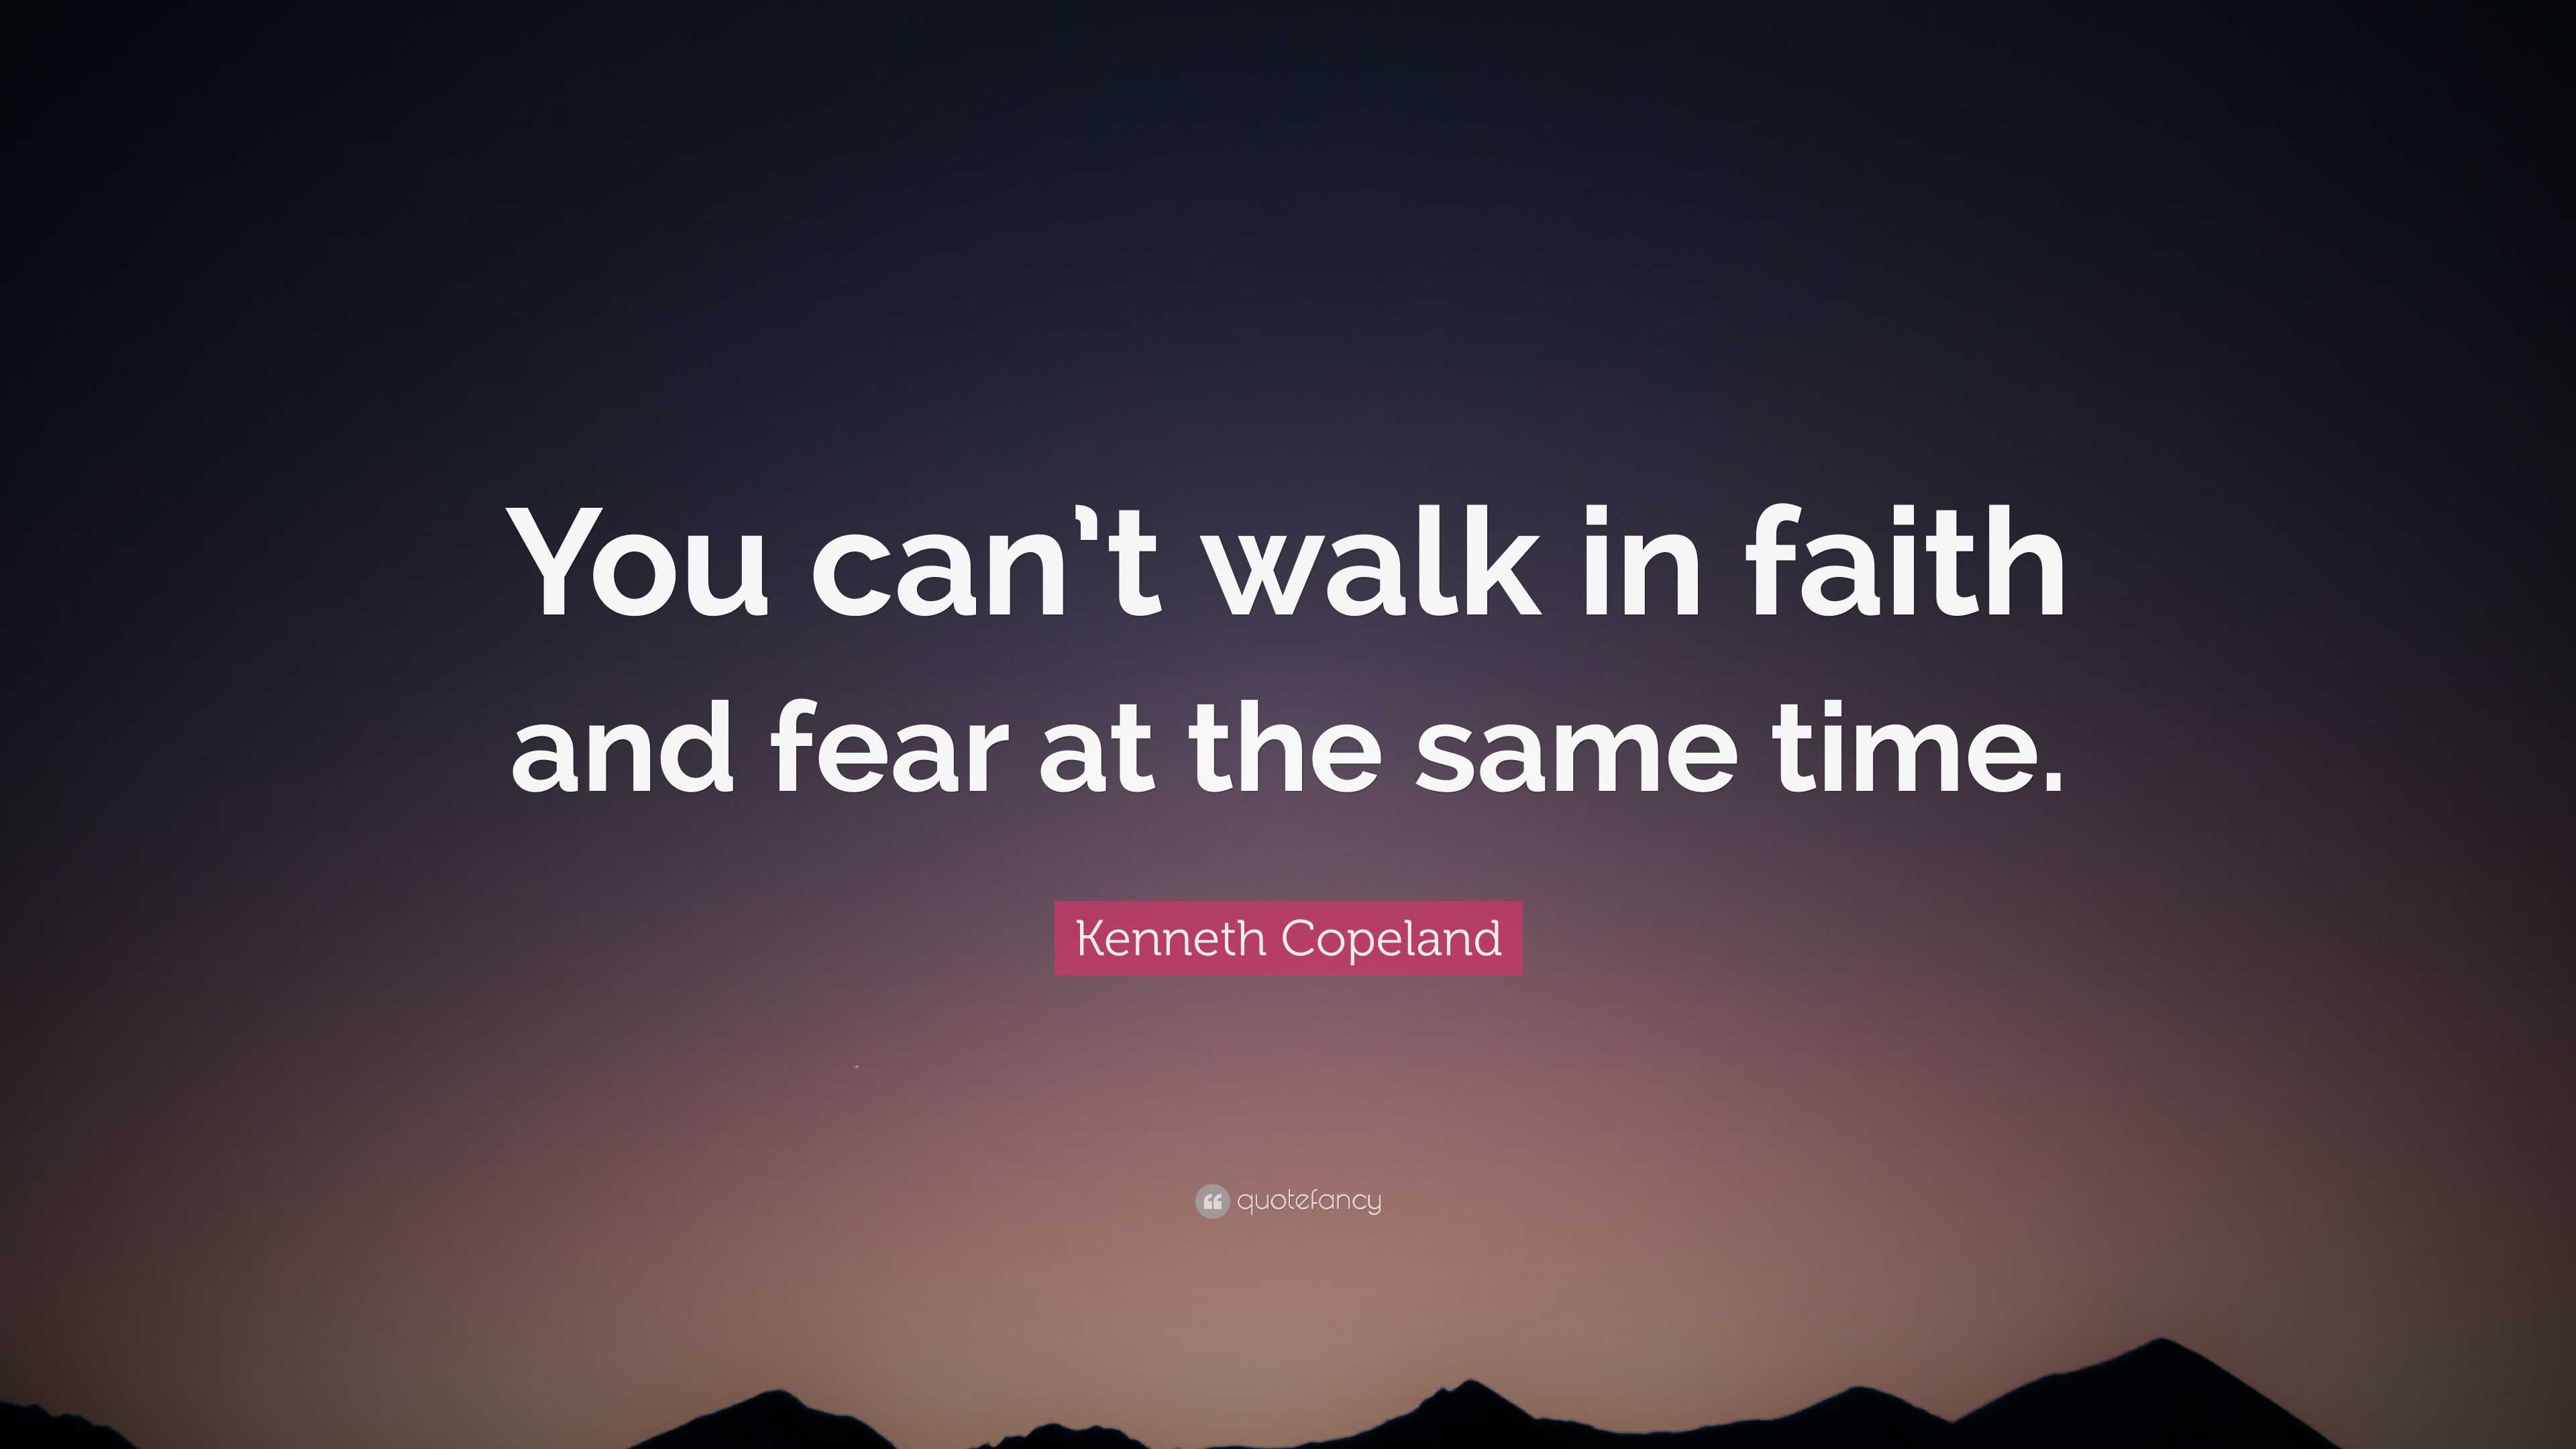 Kenneth Copeland Quote: "You can't walk in faith and fear at the same time." (9 wallpapers ...